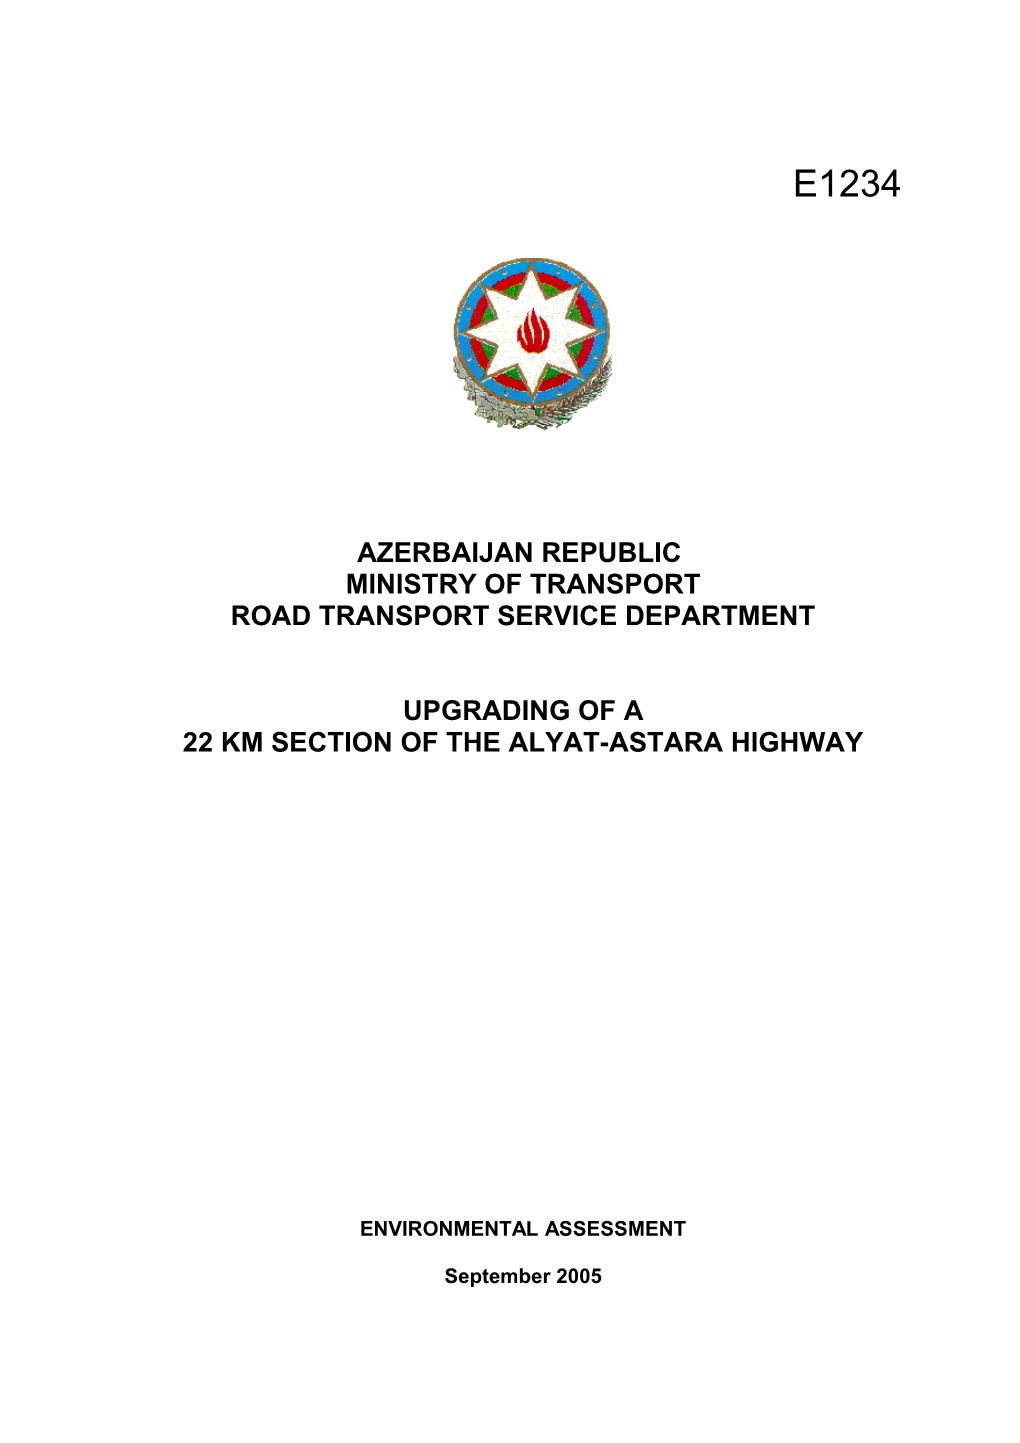 Preliminary Design for a 22 Km Section of the Alyat Astara Highway - Environmental Assessment